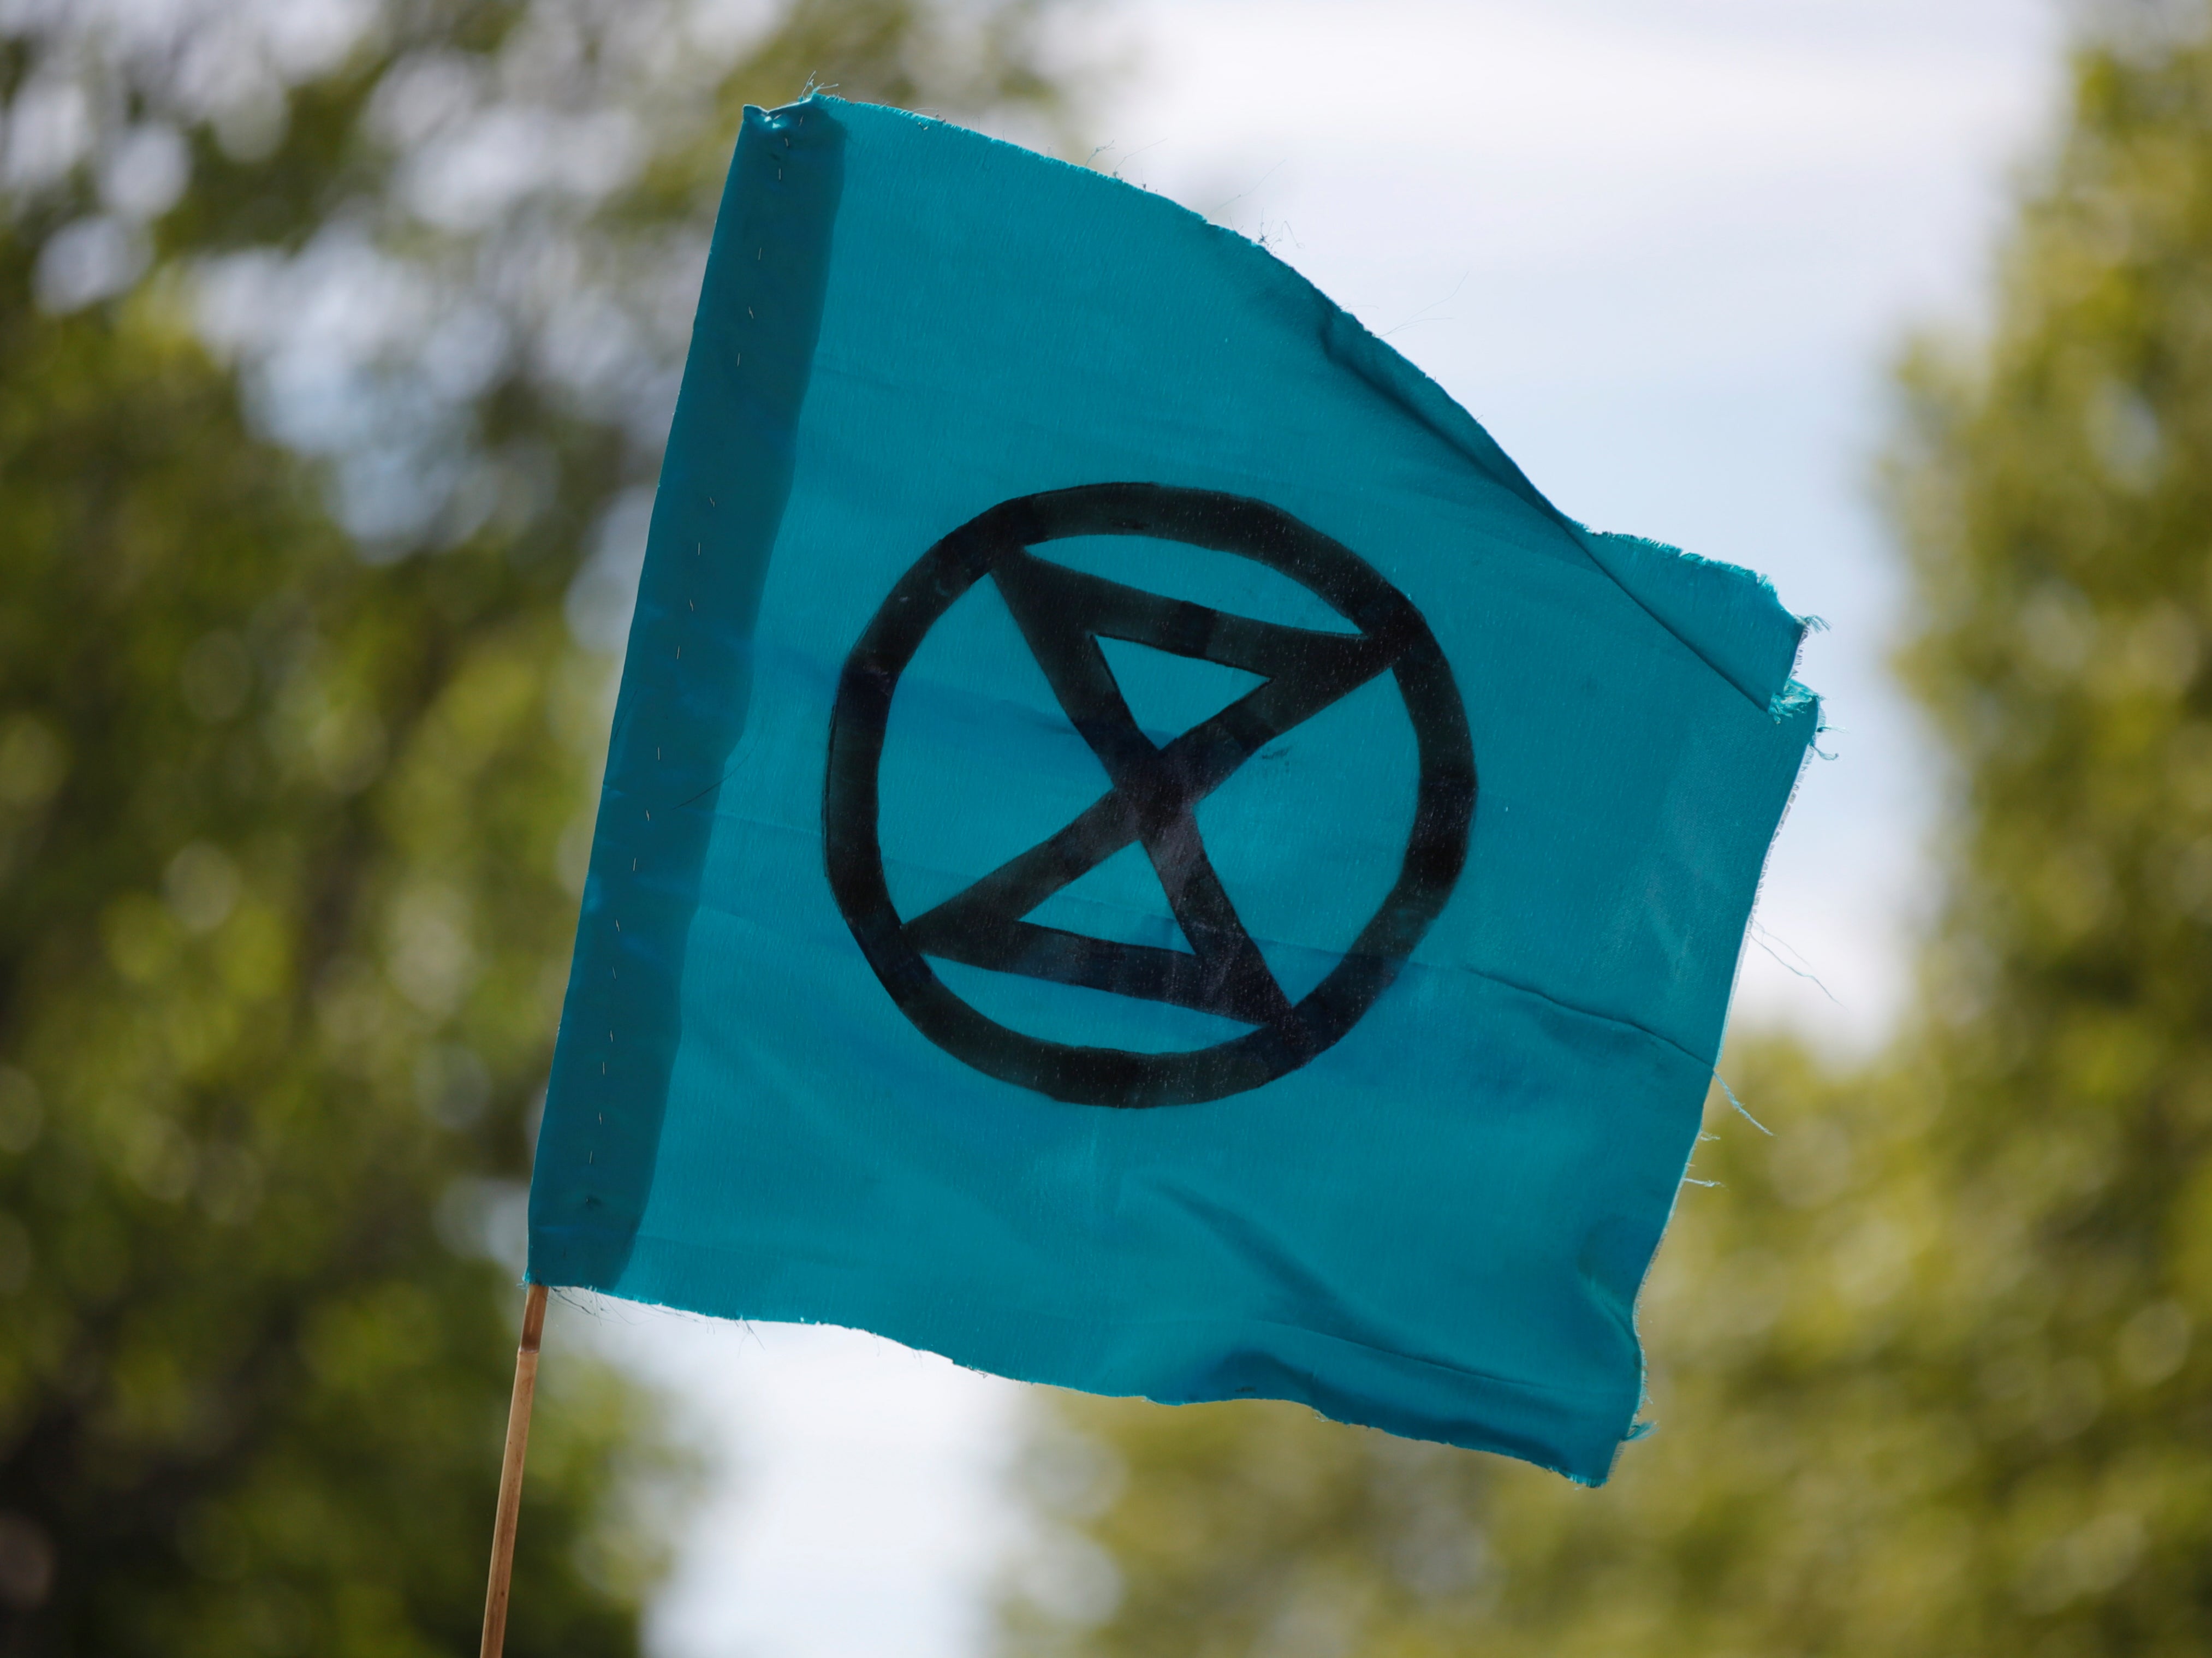 Extinction Rebellion groups are holding demonstrations in Cornwall urging greater action to tackle the climate and ecological emergencies